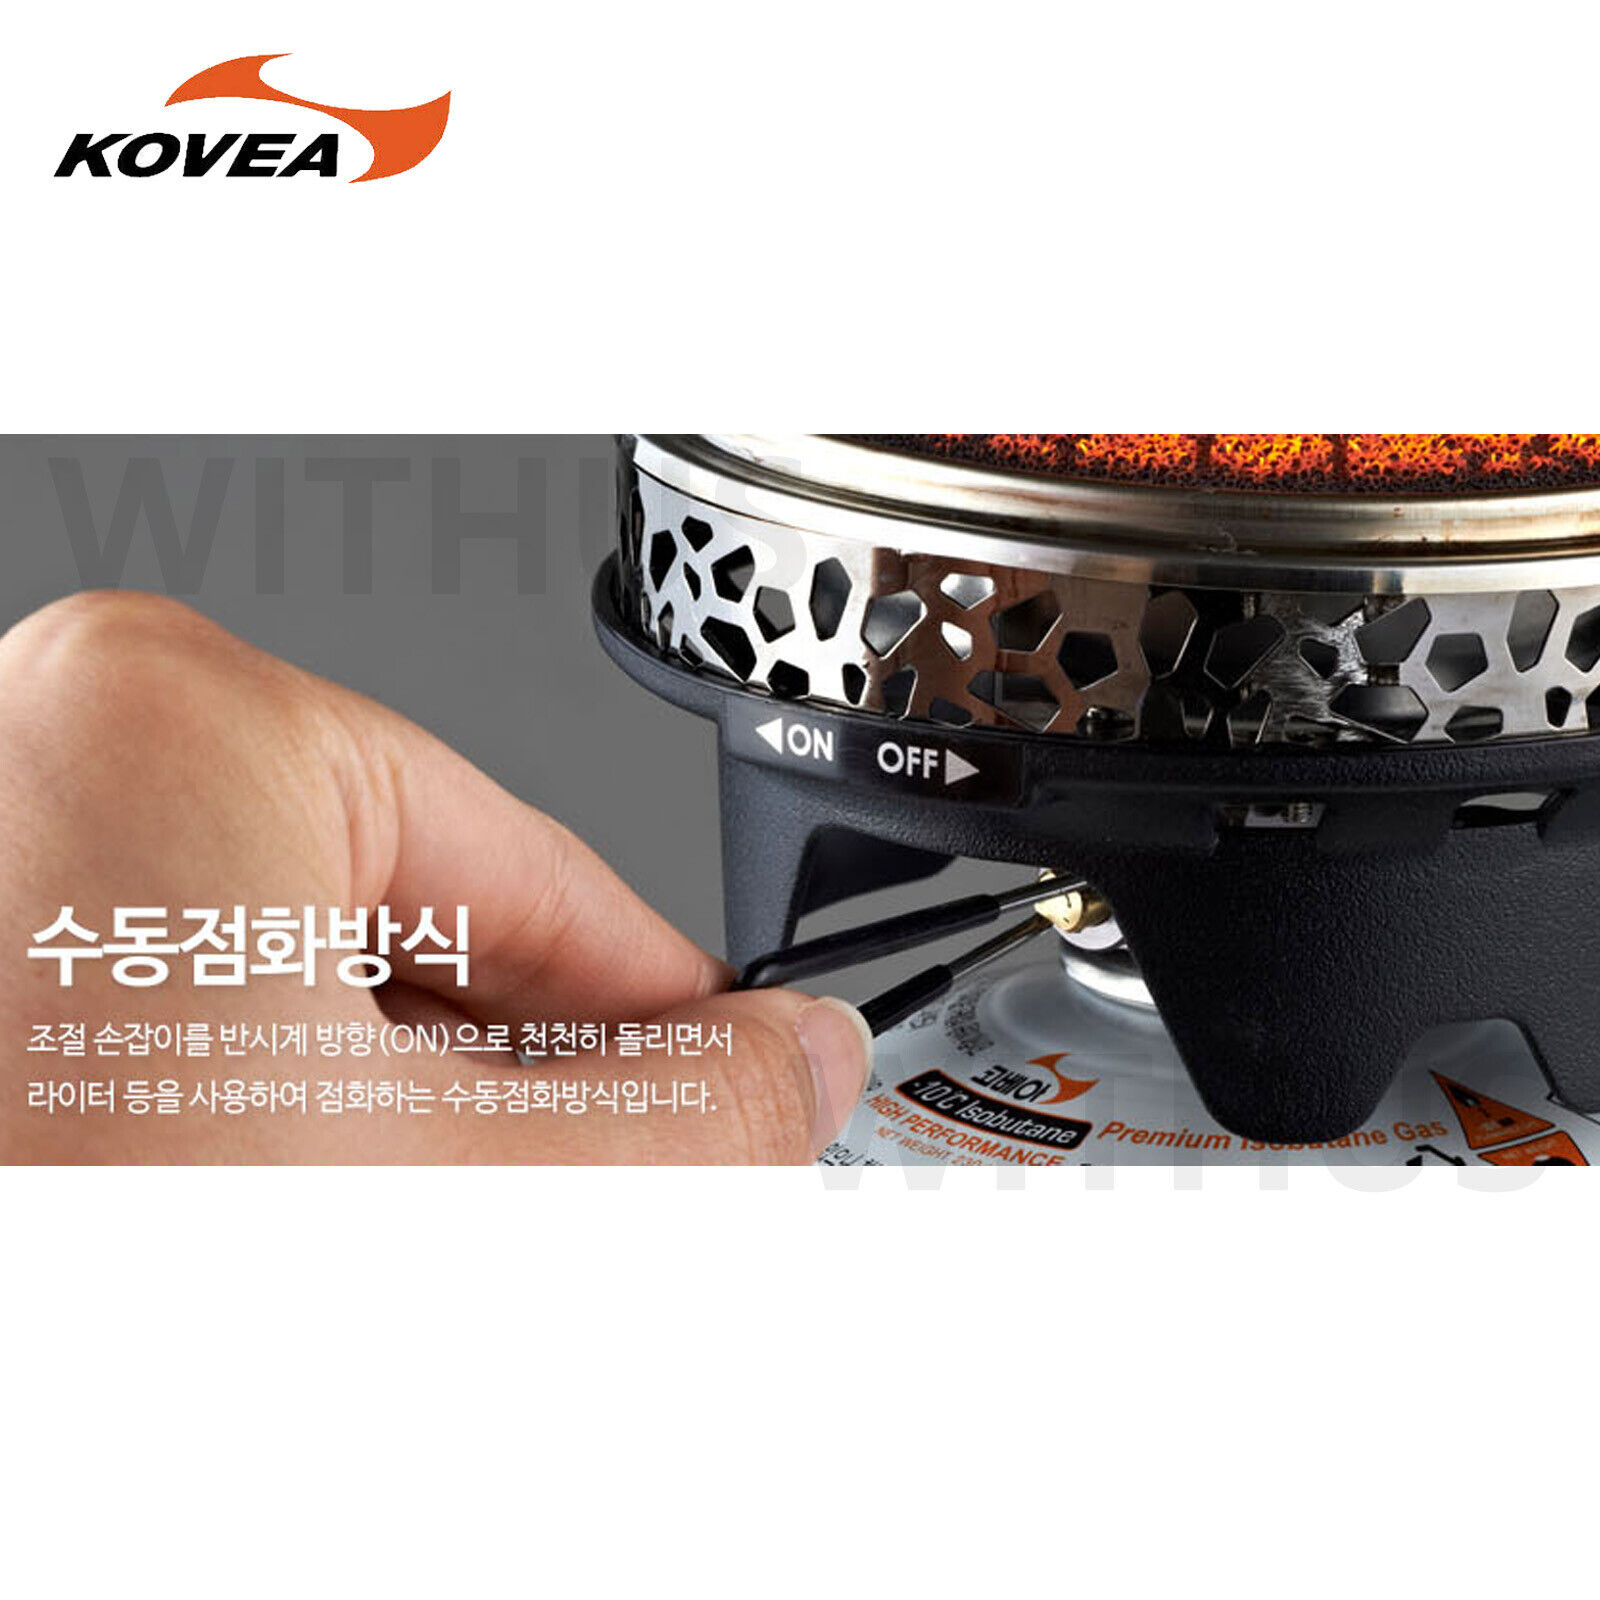 KOVEA ALPINE MASTER 3.8 All-in-one Portable Stove and Pot Camping